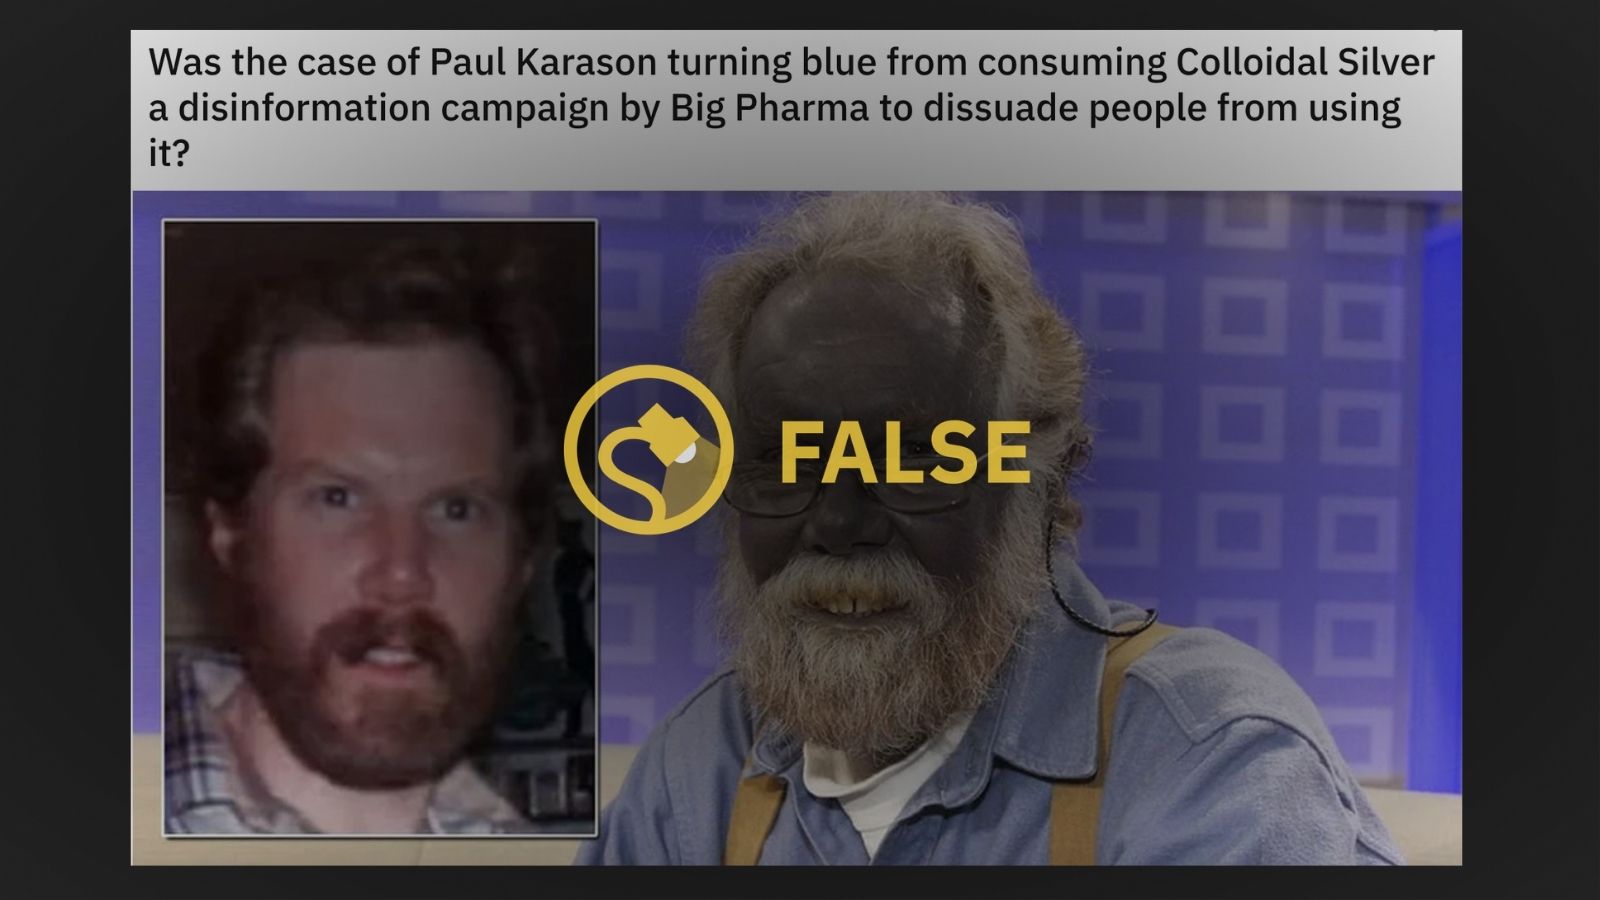 No, the Case of Paul Karason Wasn't 'Disinformation' To Scare People Away  from Using Colloidal Silver